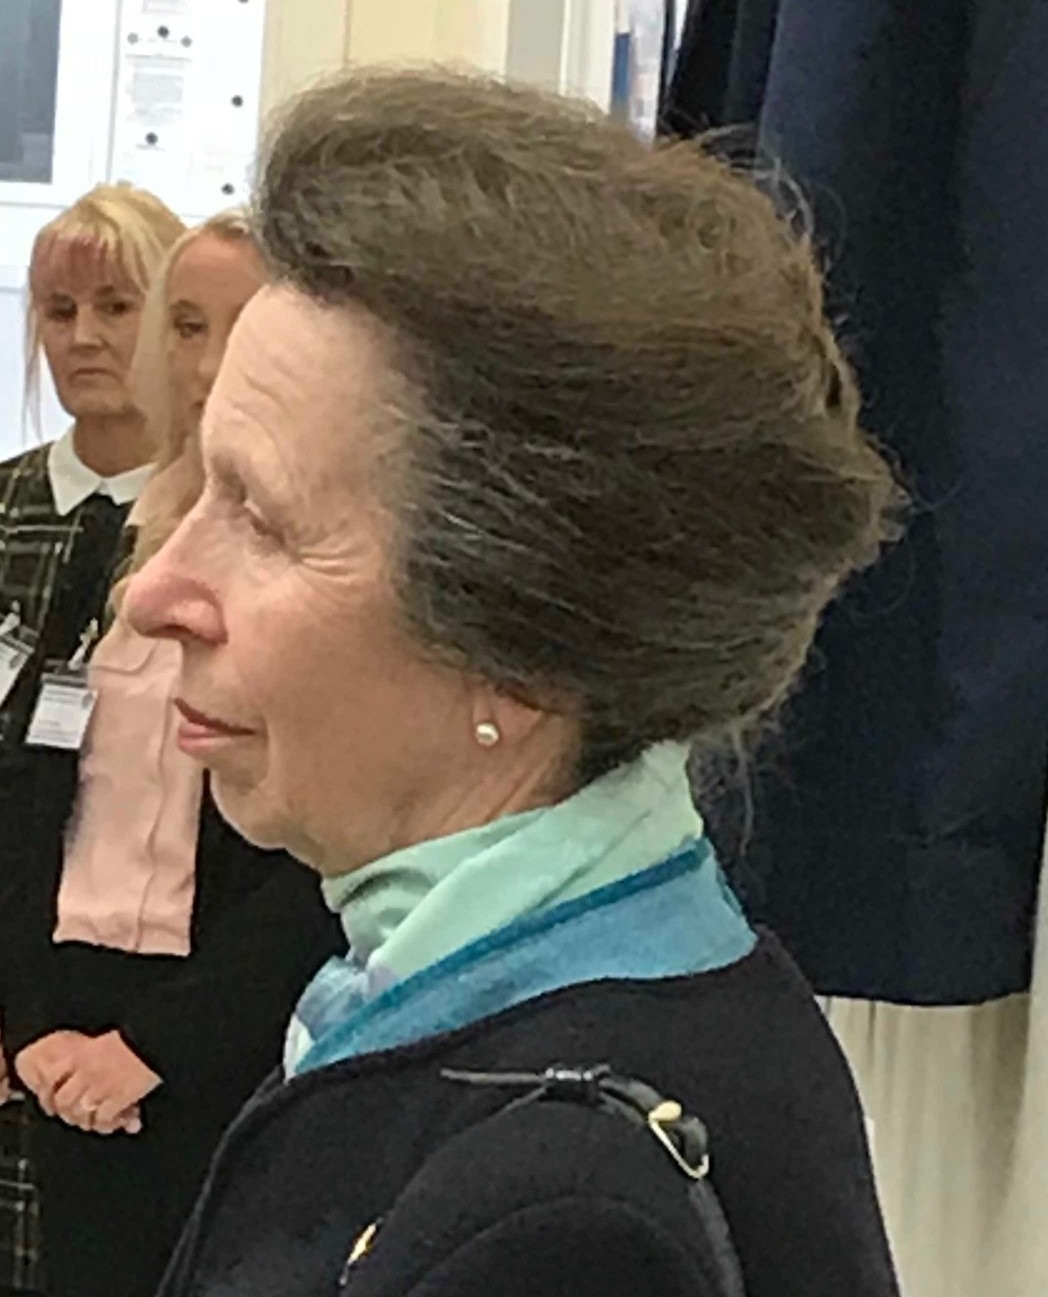 Her Royal Highness, the Princess Royal, Patron of Citizen's Advice Scotland, earlier today about to unveil a plaque to mark the opening of the new CAB premises in Alloa and the Golden Jubilee of the provision of this service in the town.